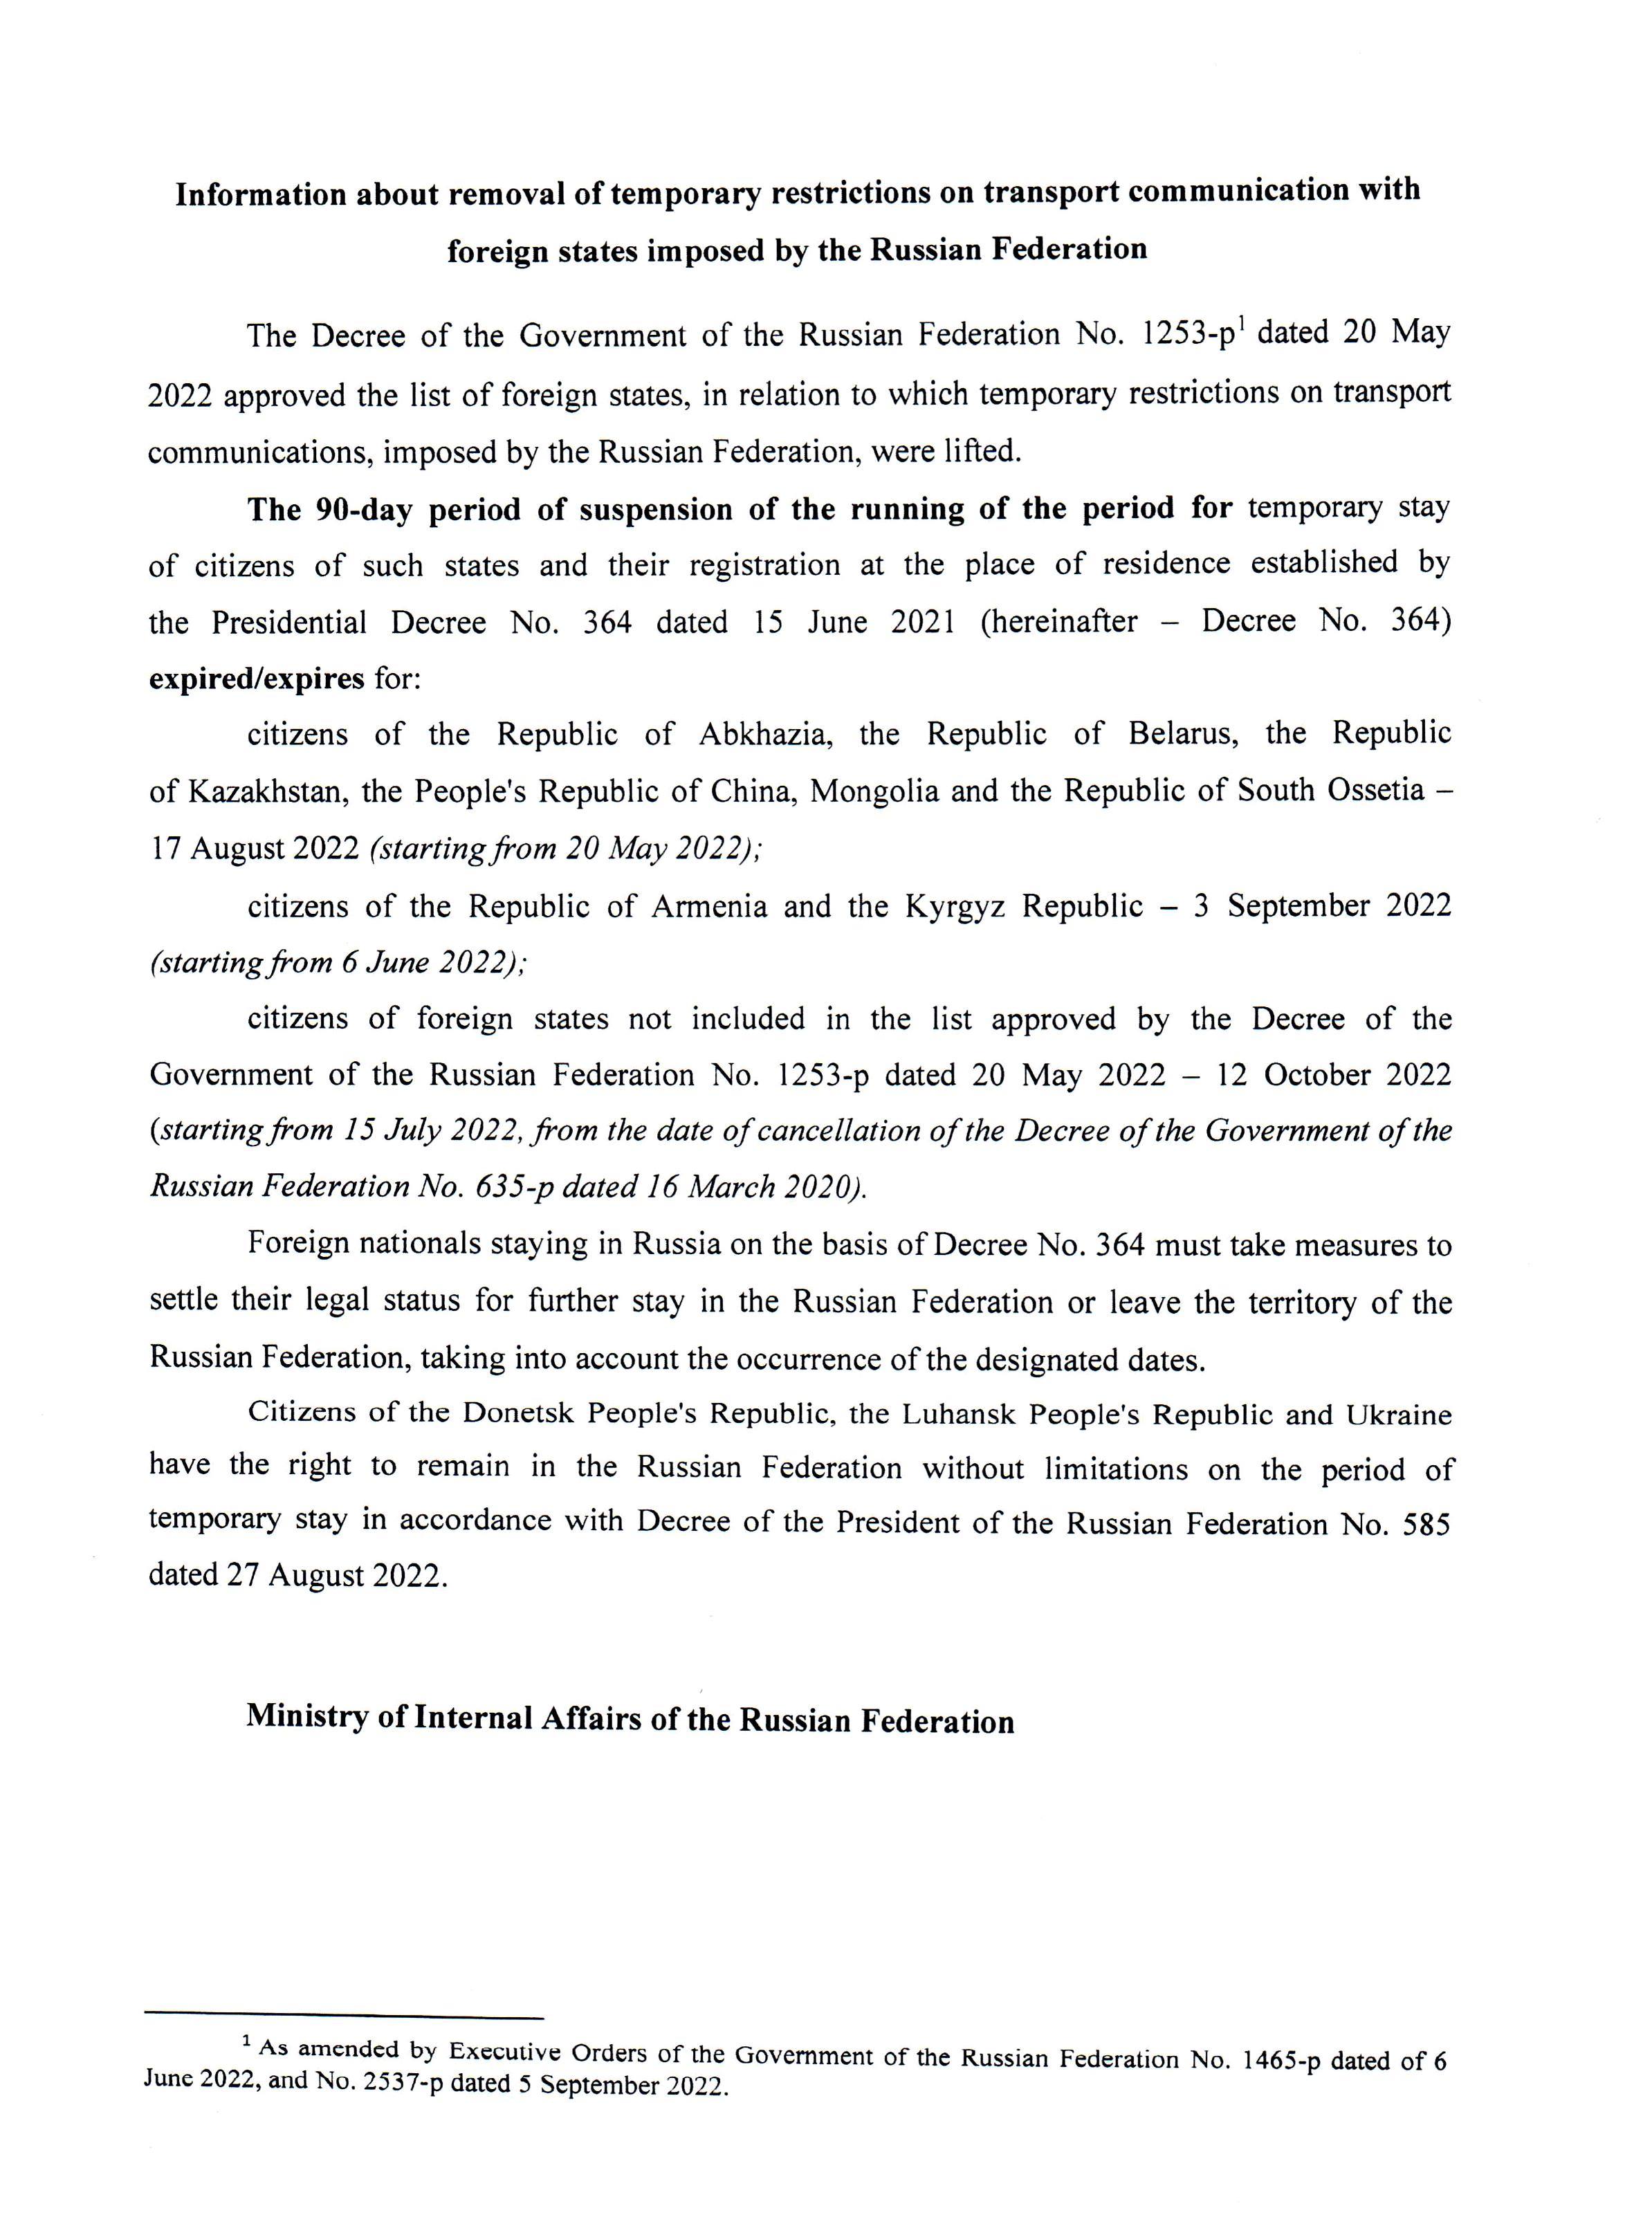 Information about removal of temporary restrictions on transport communication with foreign states imposed by the Russian Federation